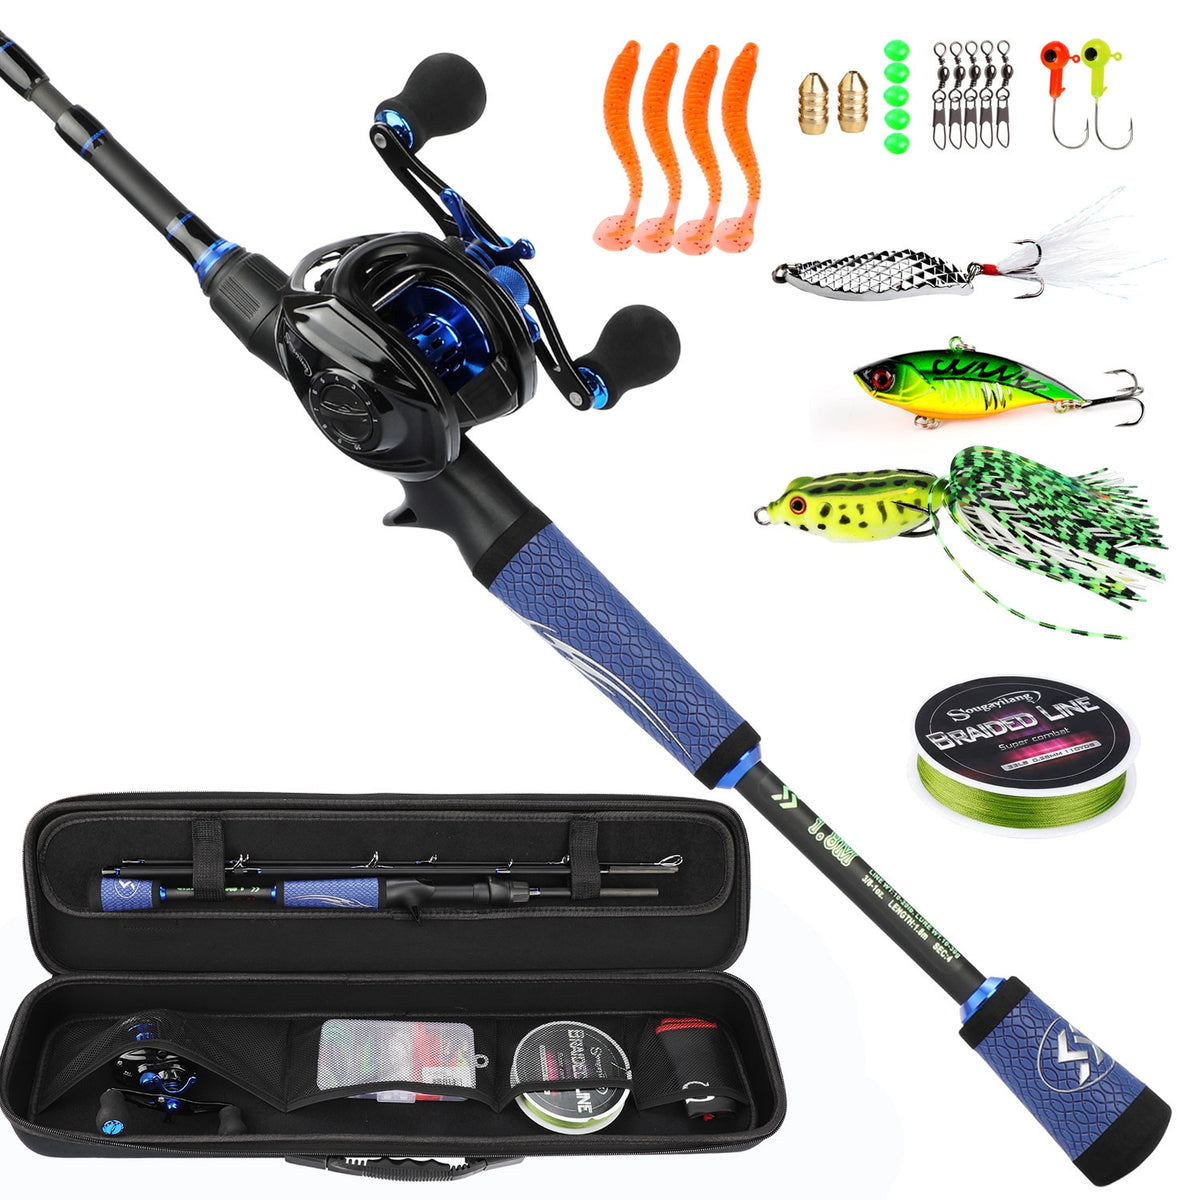 Fishing Rod Fishing Rod and Baitcasting Reel Combo 4 Sections Carbon  Casting Lure Rod and Baitcast Reel Sets Fishing Combos (Size : 1.8M and  Left